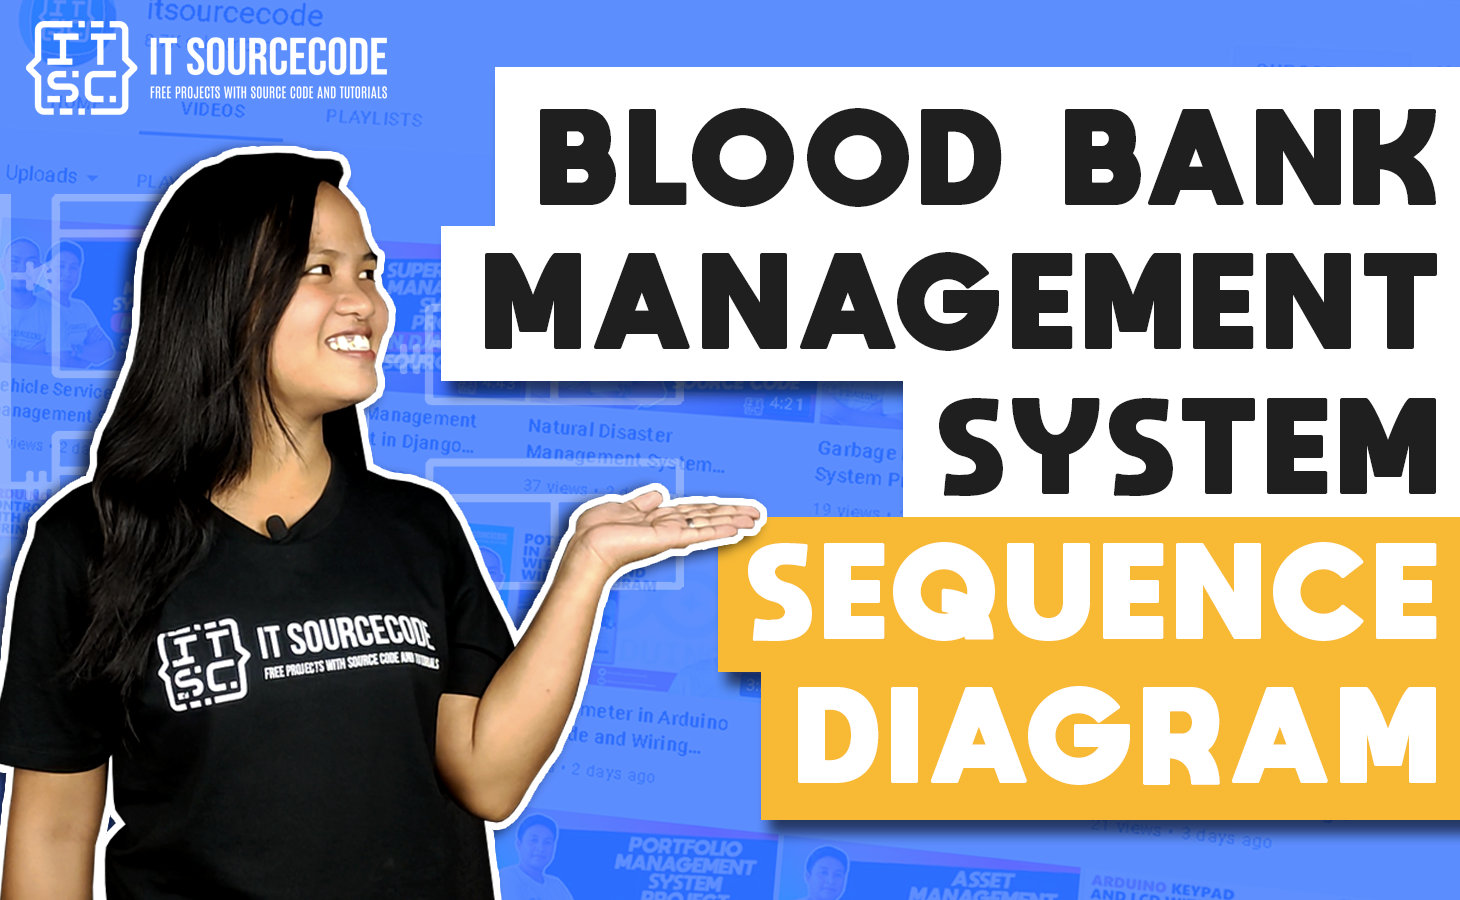 Sequence Diagram for Blood Bank Management System